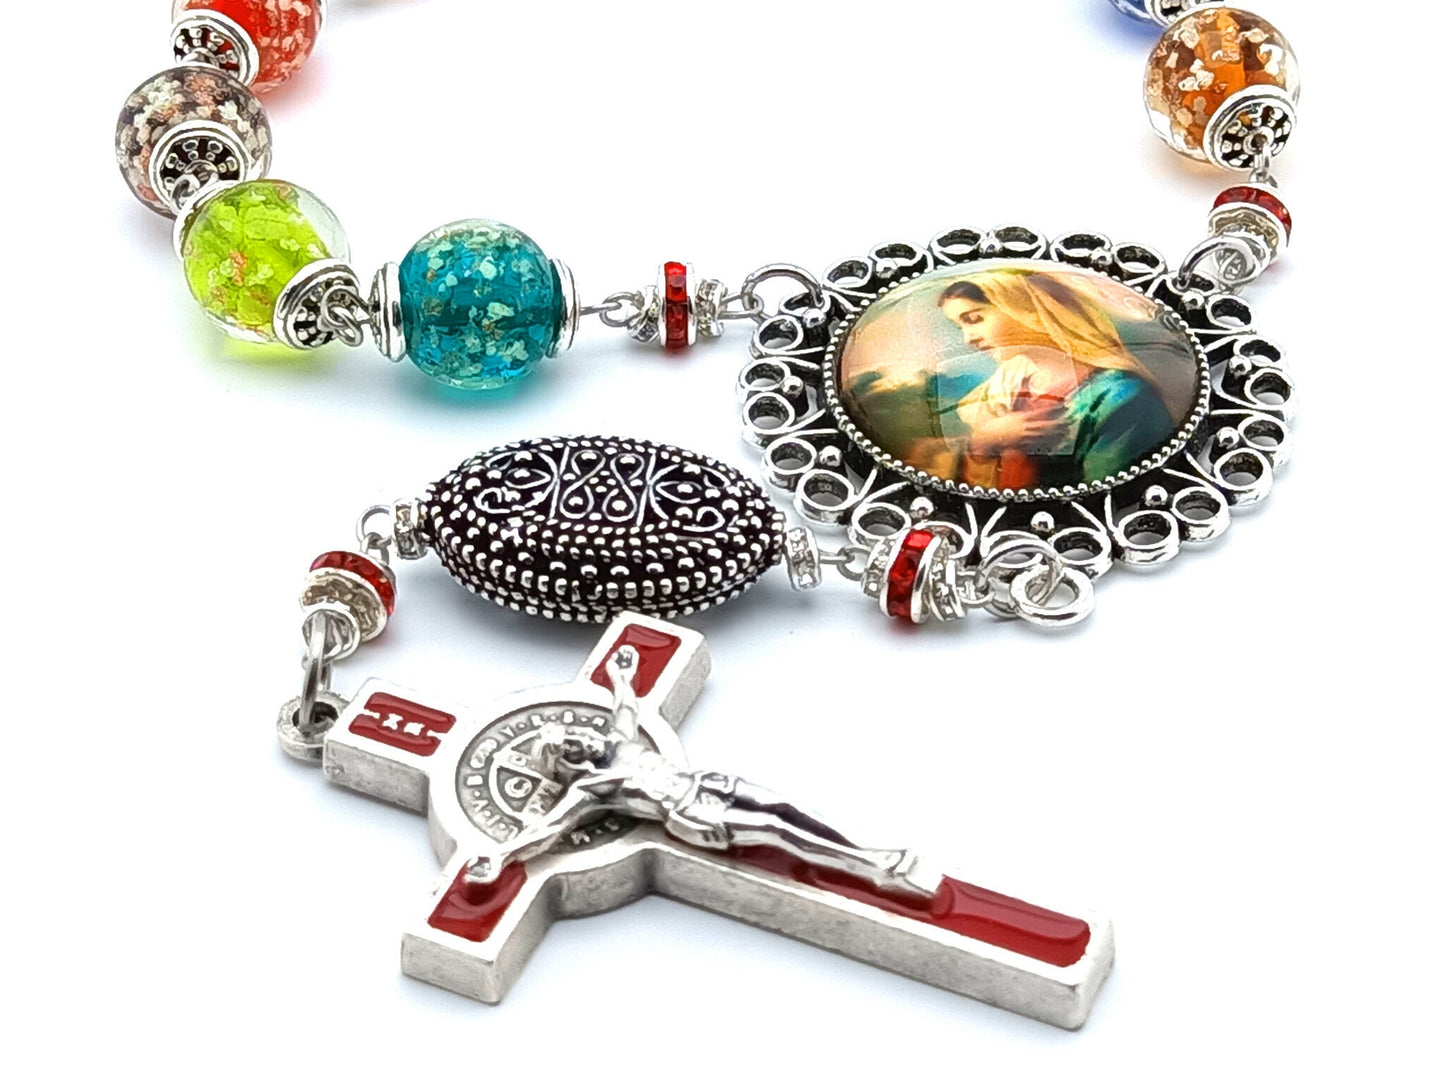 Our Ladys Fiat unique rosary beads single decade rosary with large glass luminous beads, picture centre medal and Saint Benedict crucifix.